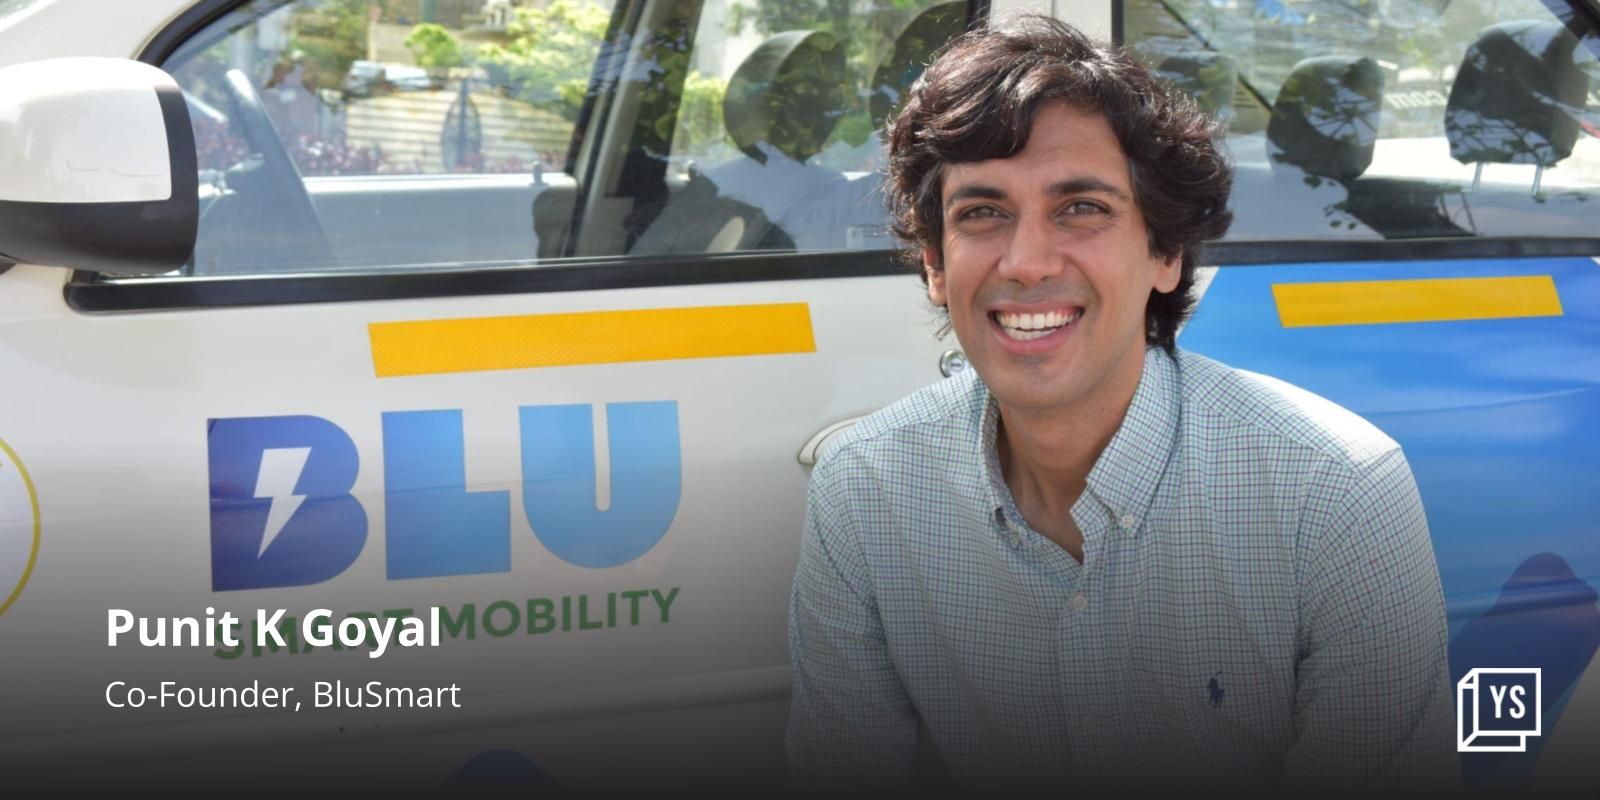 With its fleet of electric vehicles, can BluSmart solve commuting woes? 